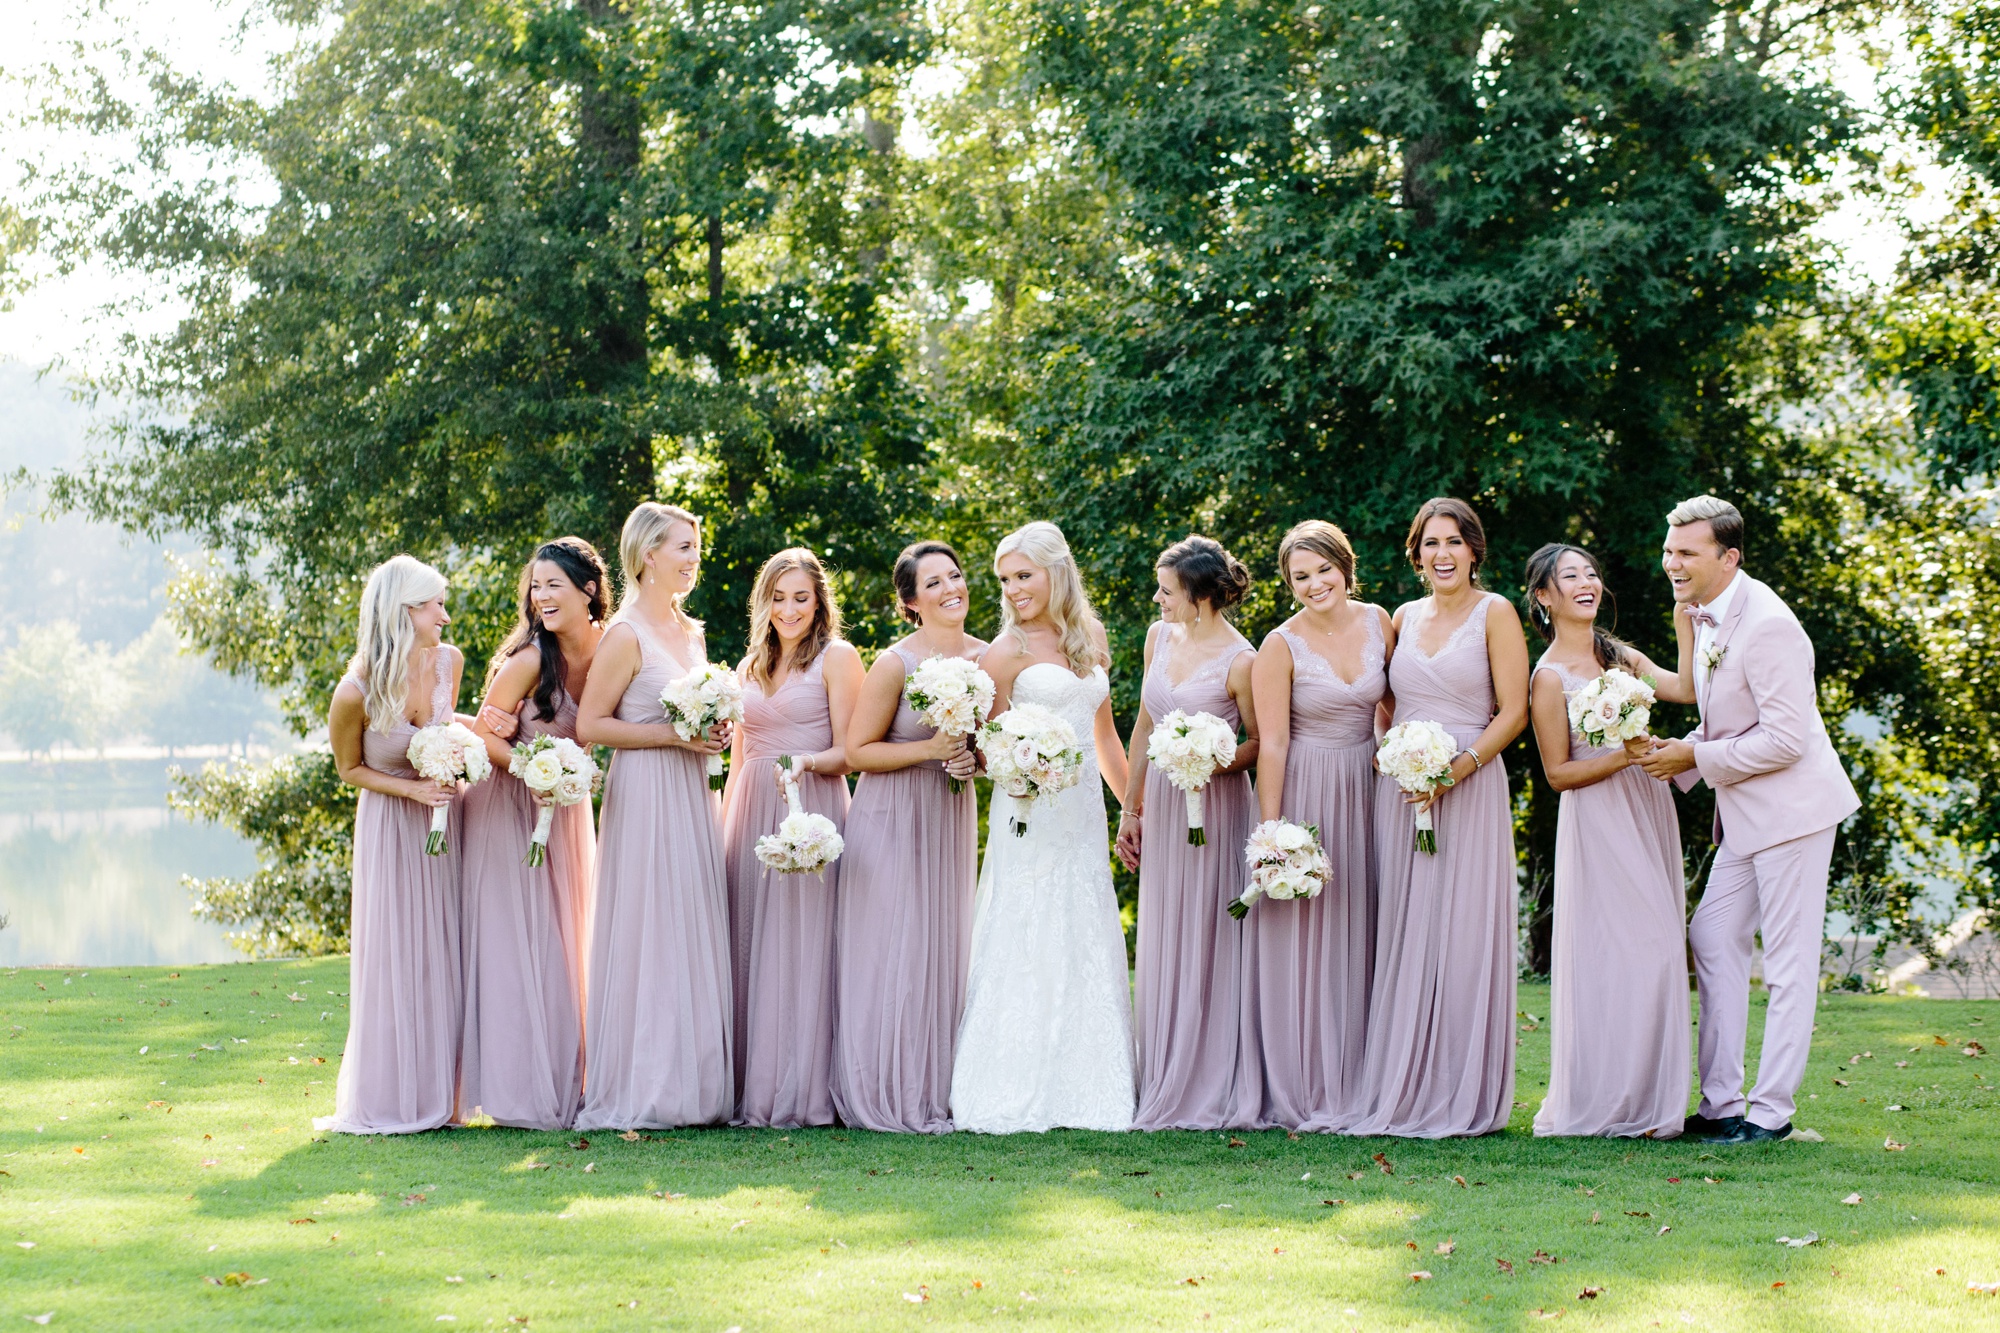 The colors of these bridesmaid dresses complimented Foxhall's rich green landscape so beautifully. Photo by Rebecca Cerasani, Atlanta's luxury destination wedding photographer.